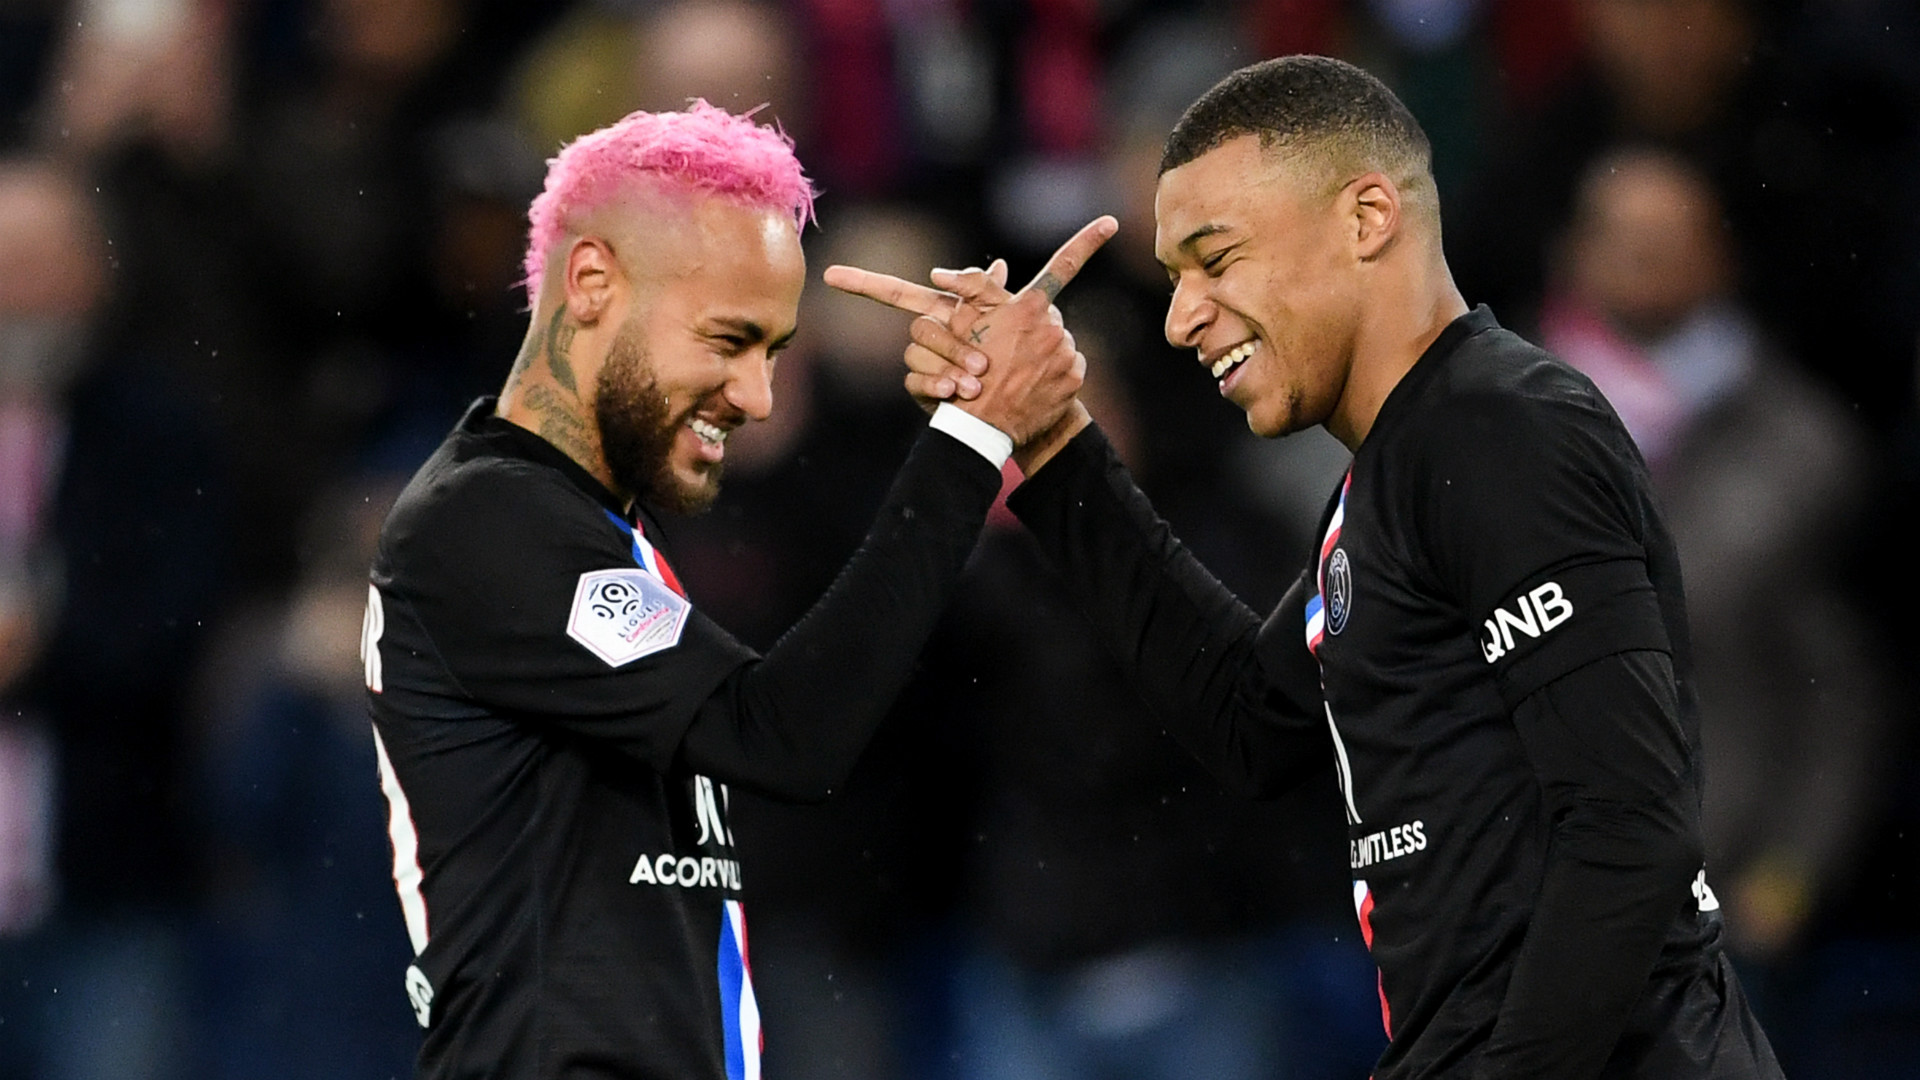 Neymar Confirms Desire To Stay At PSG With Mbappe